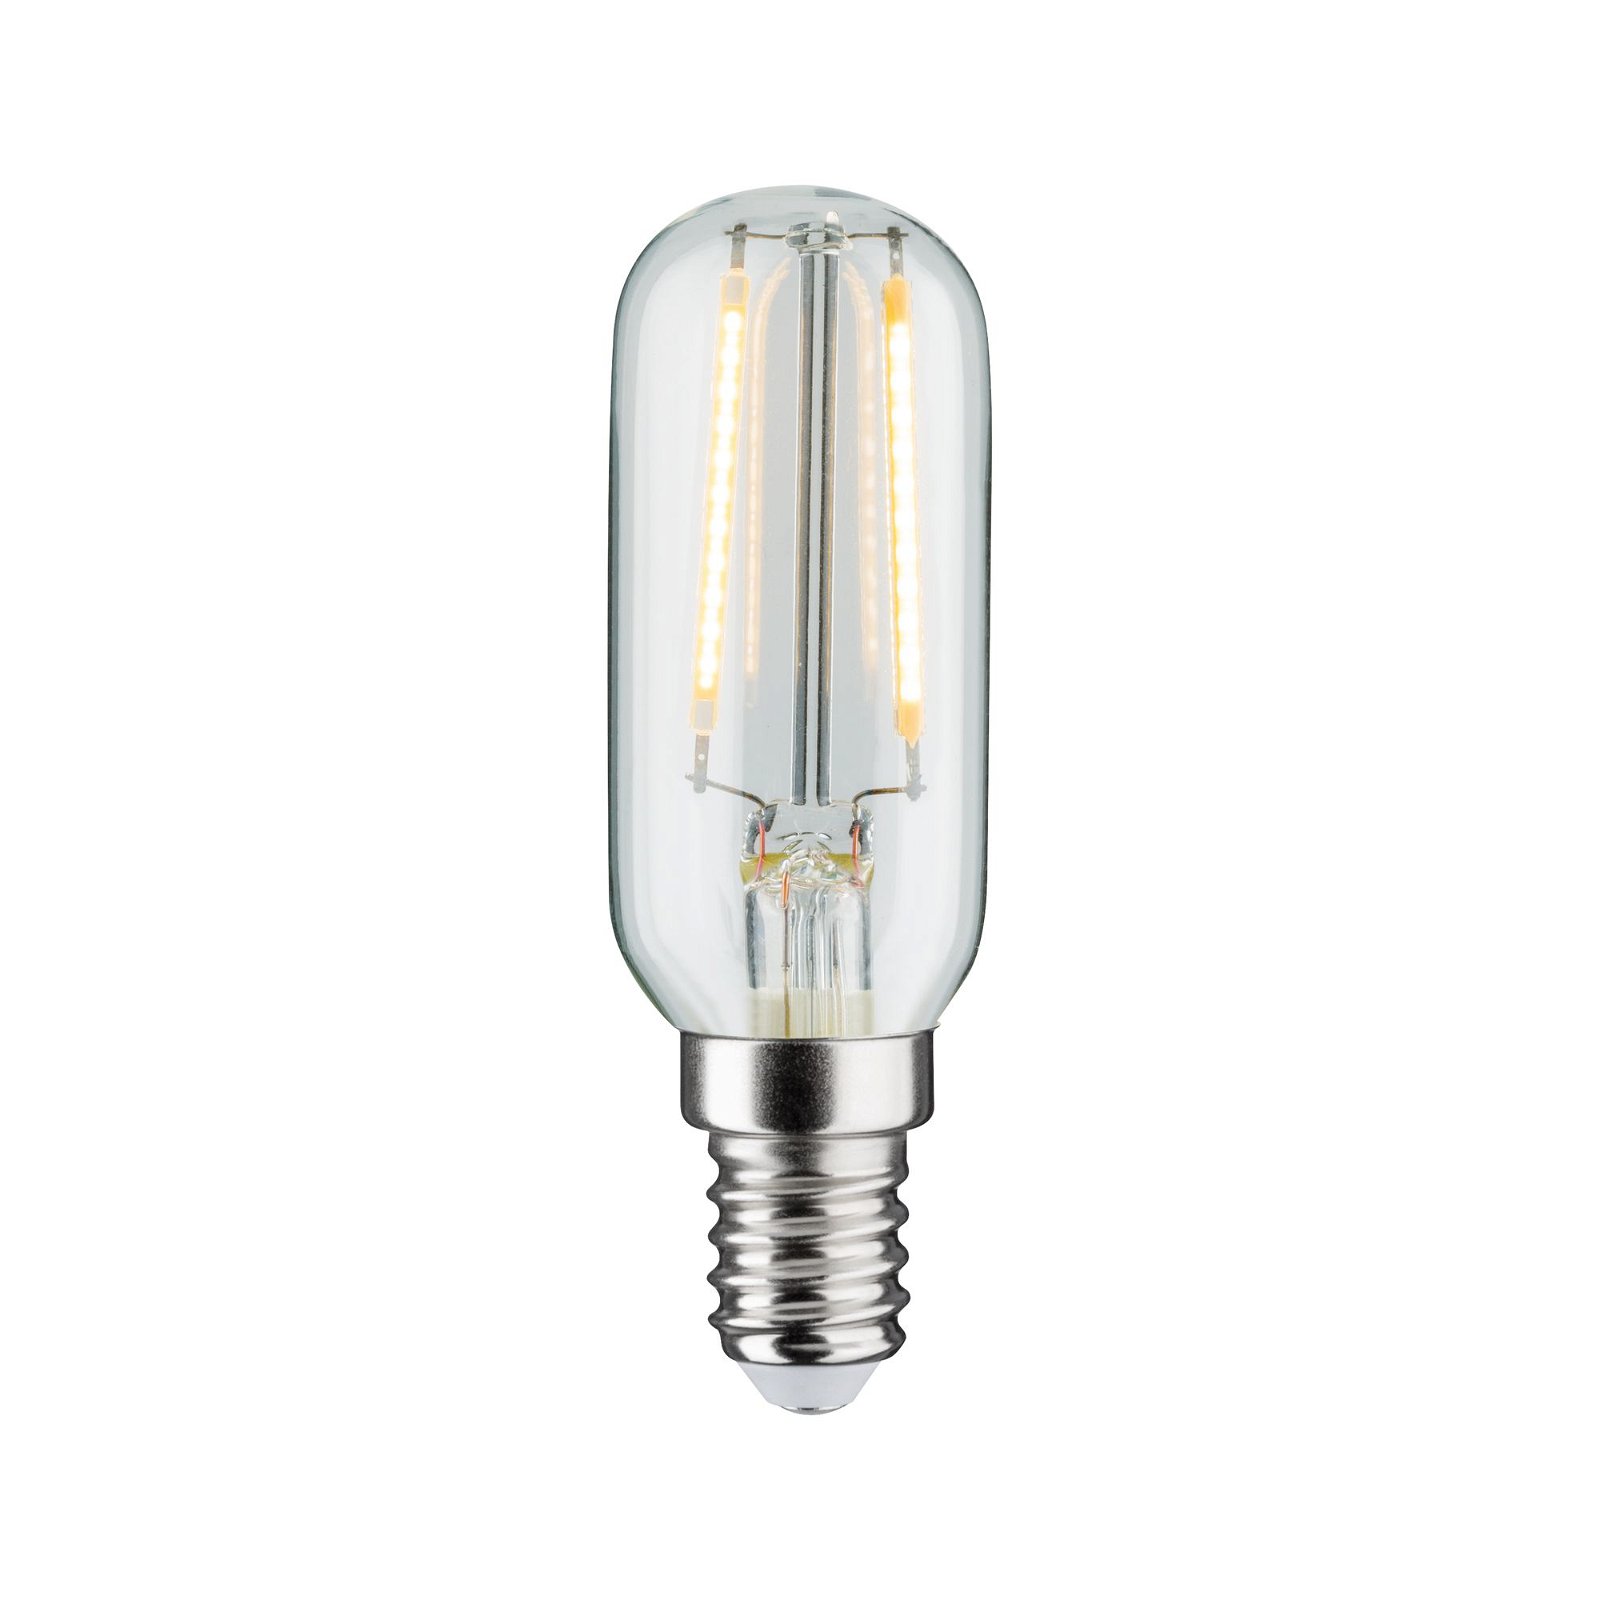 LED Retro tube 2.8 W E14 clear Warm white, dimmable